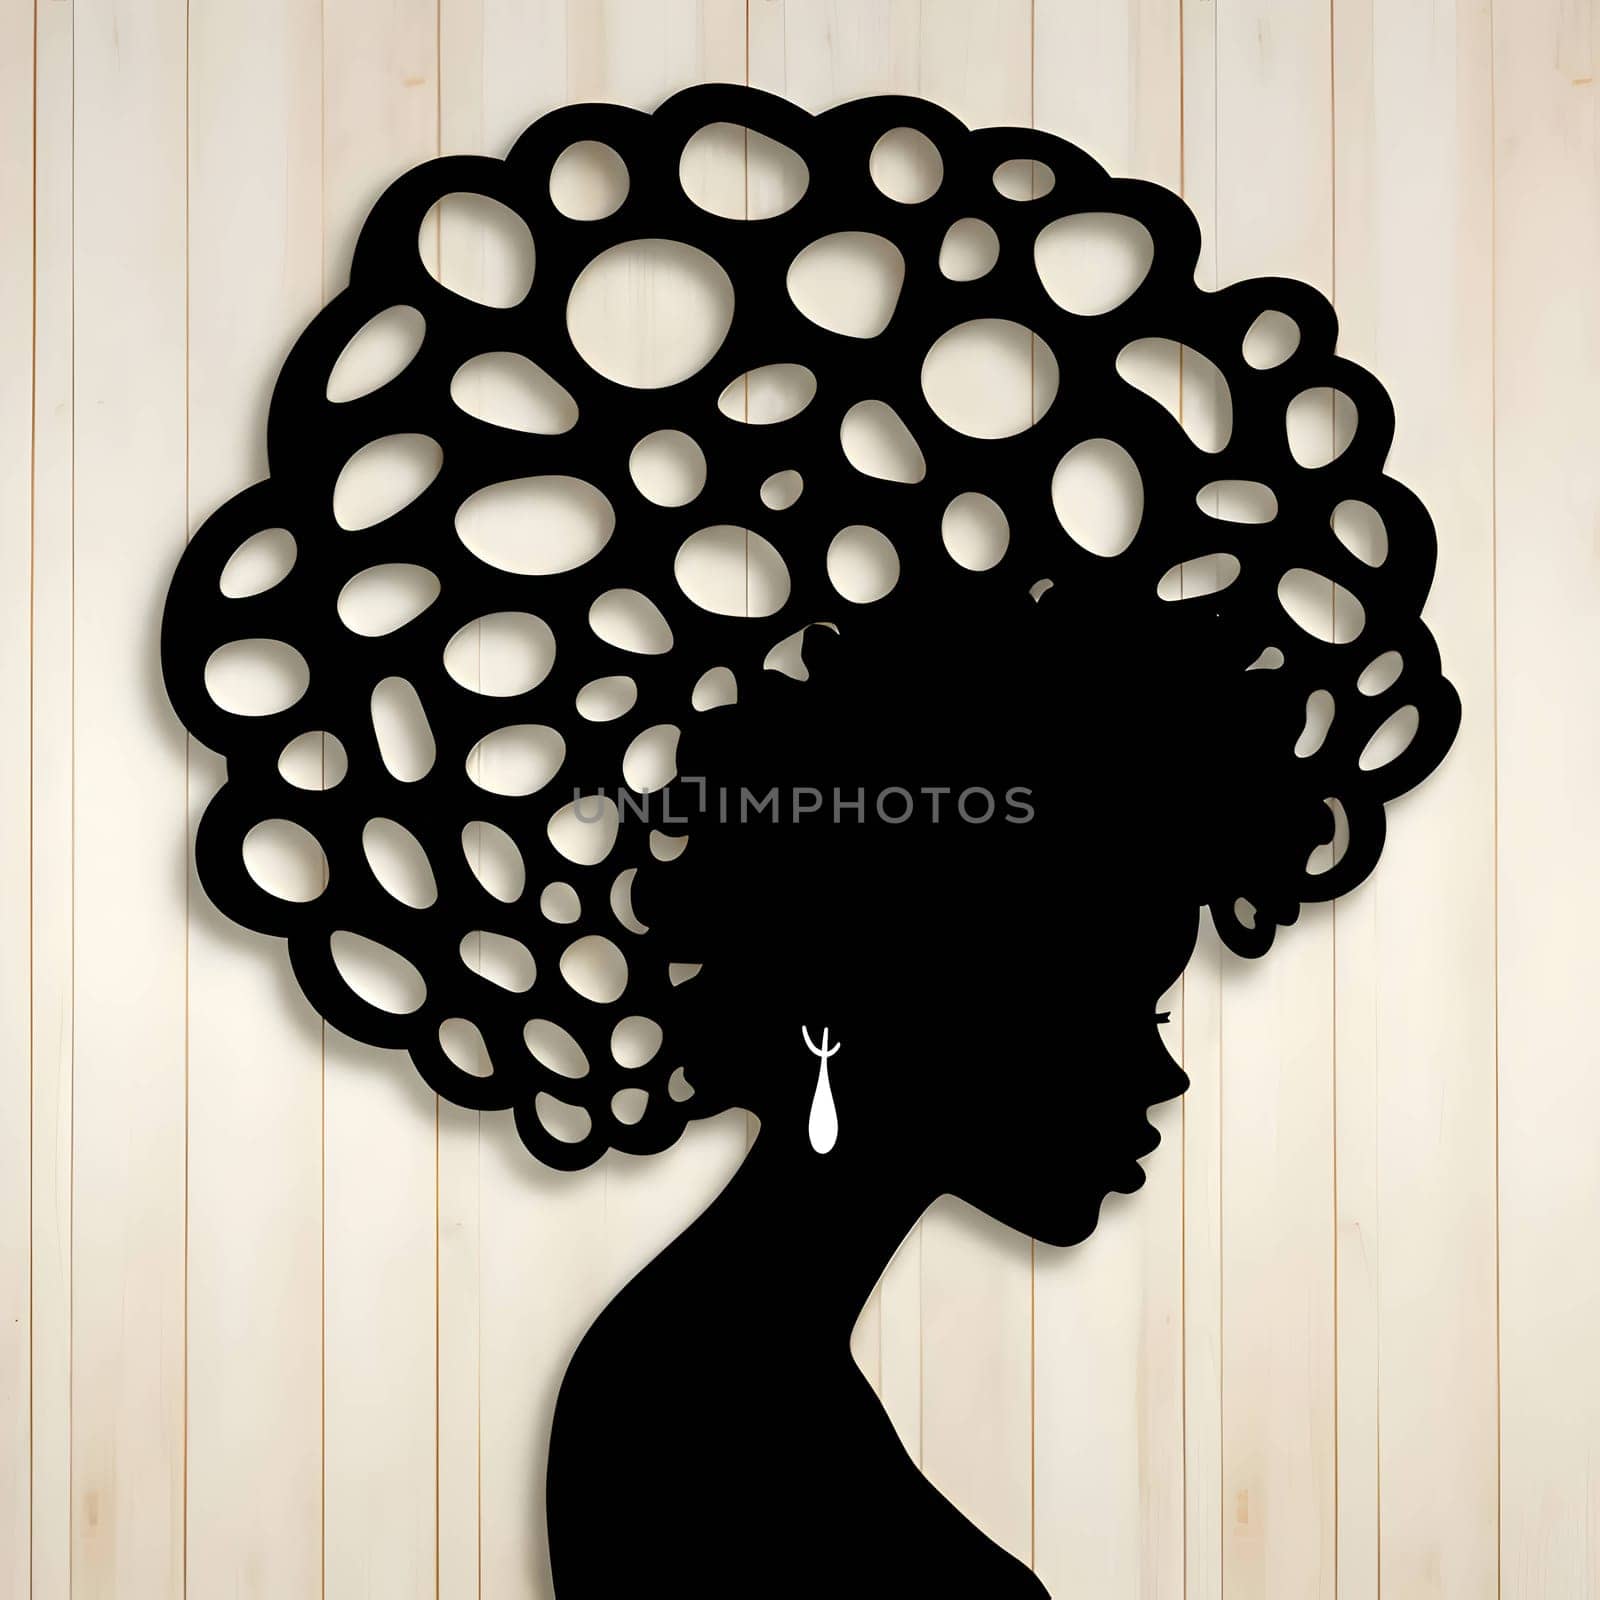 Vector illustration of a woman with afro-textured hair in black silhouette against a clean white background, capturing graceful forms.